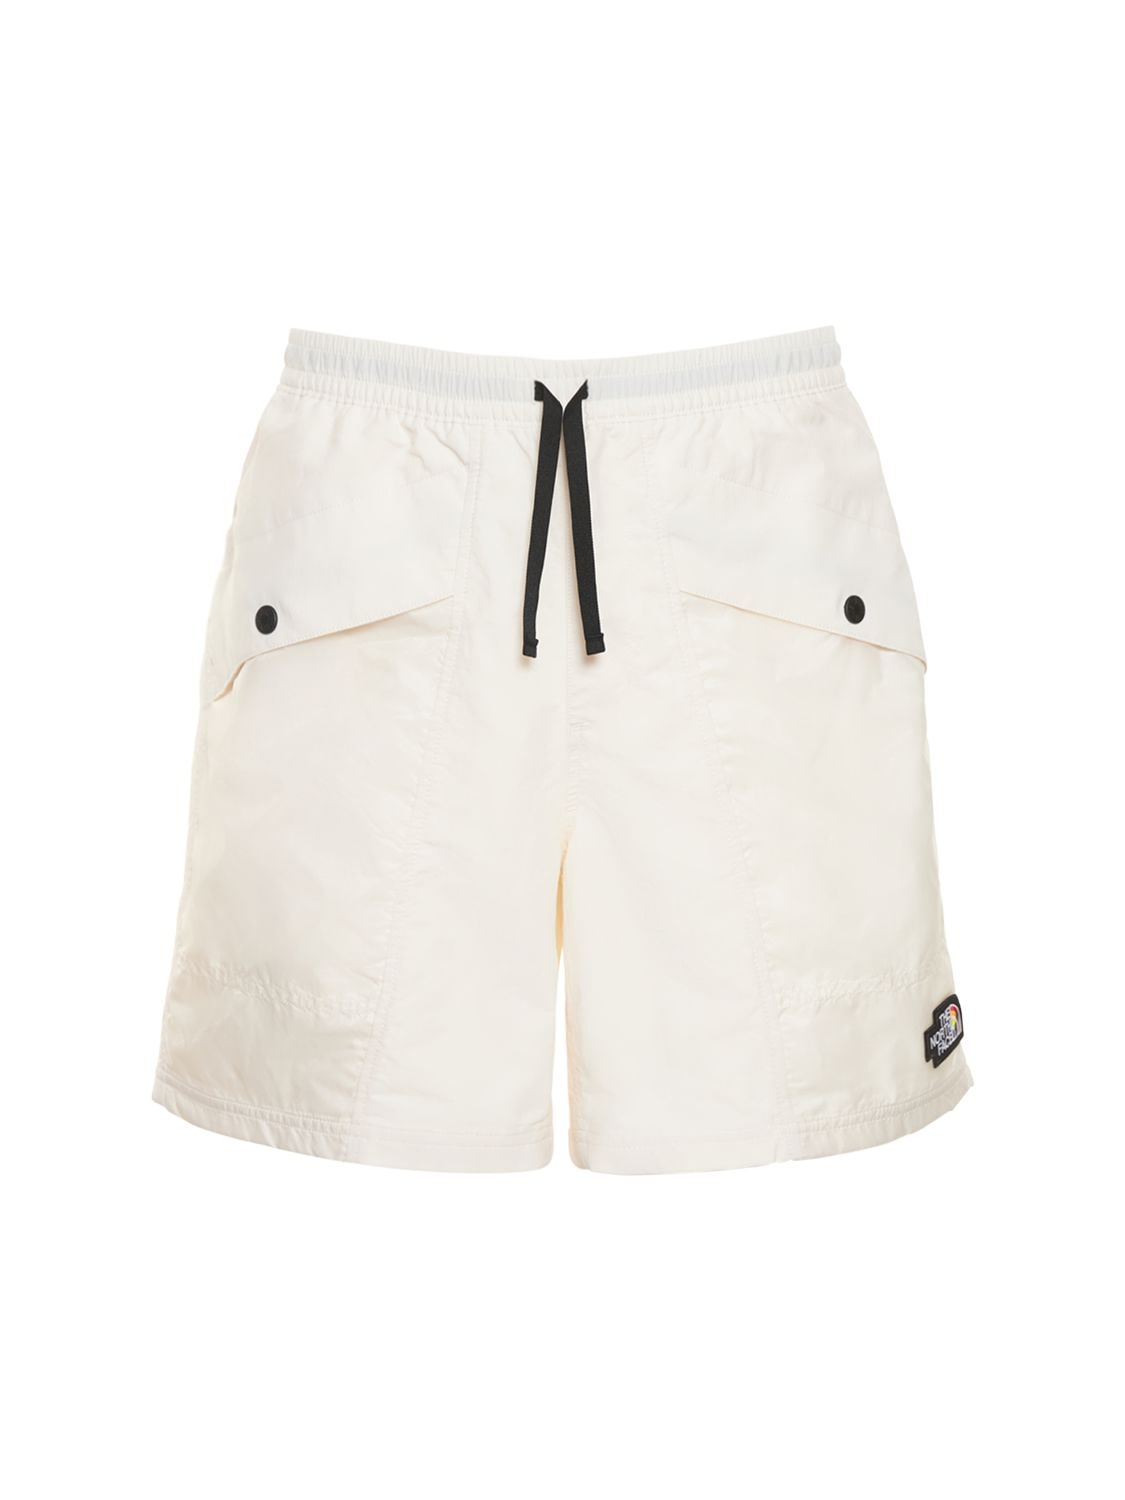 Pride Outline Recycled Tech Shorts - THE NORTH FACE - Modalova